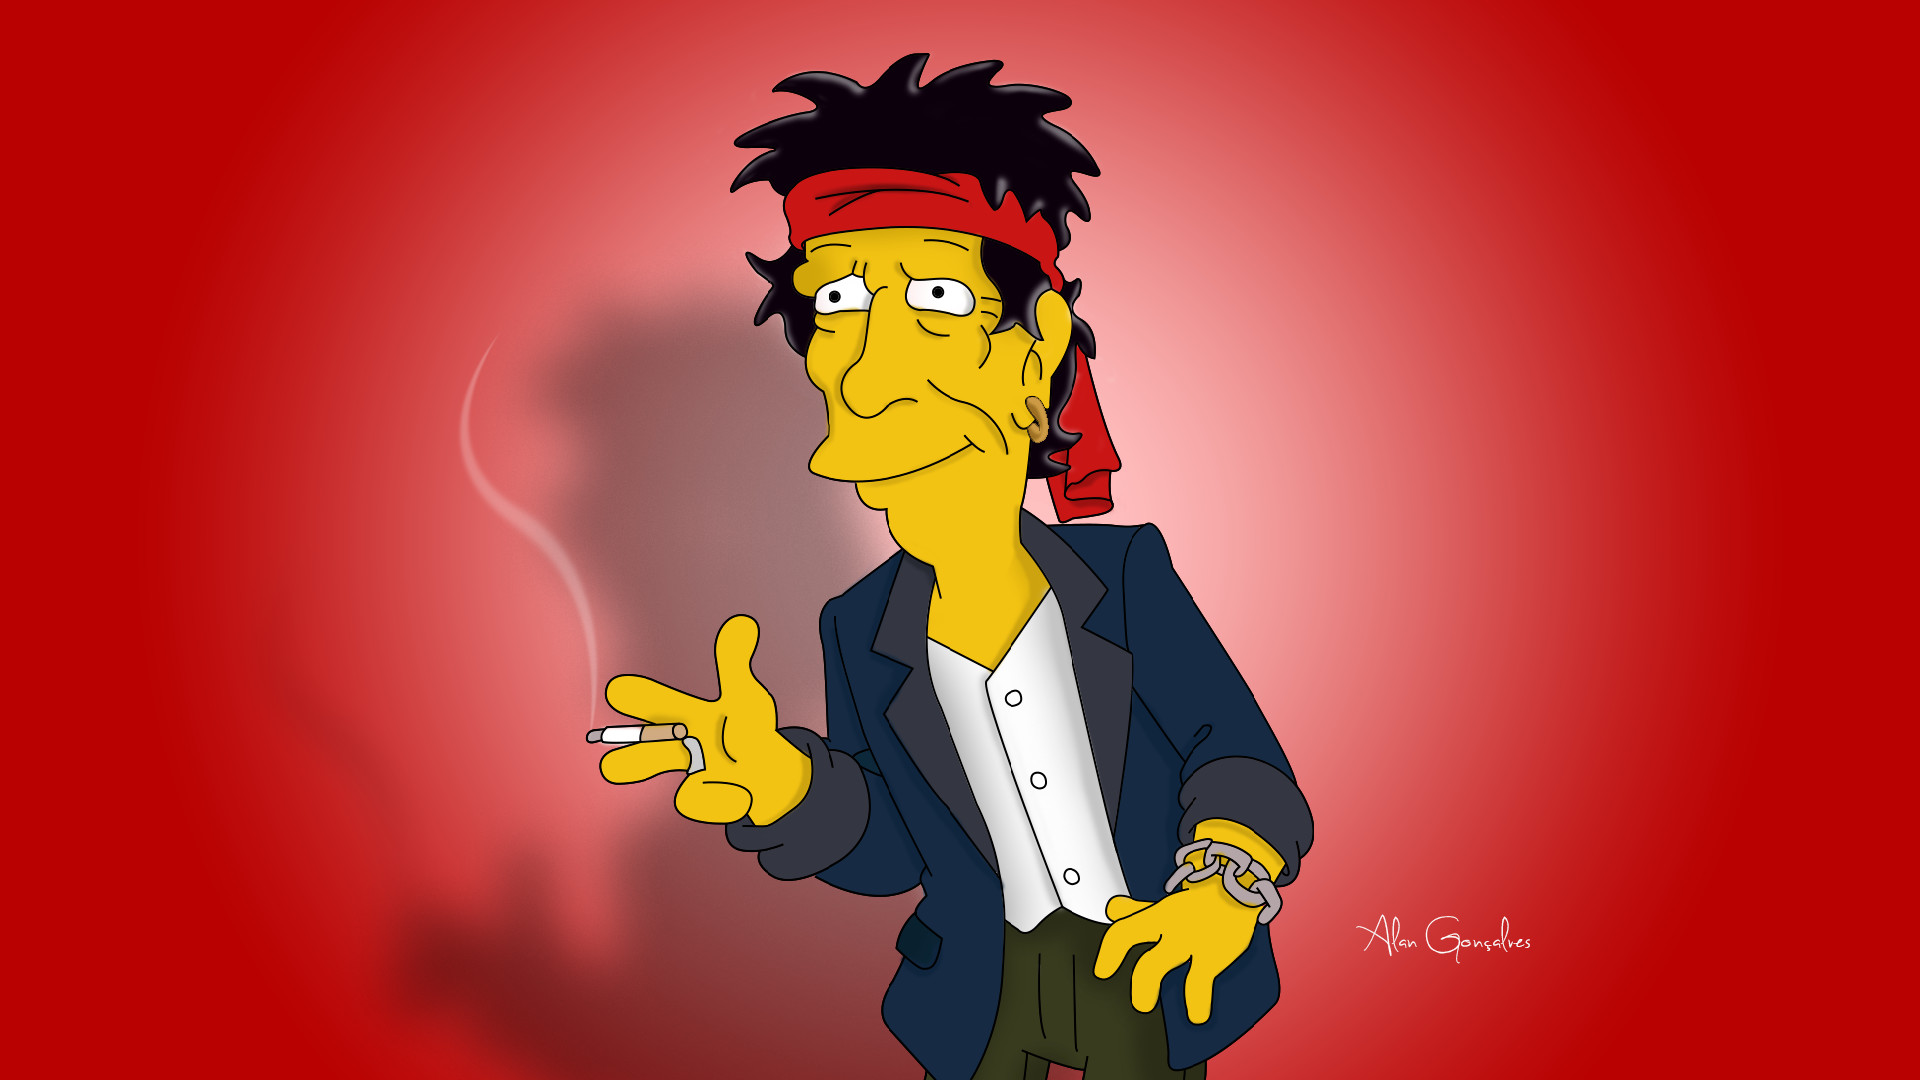 1920x1080 Keith Richards - Simpsons by AlanGoncalves Keith Richards - Simpsons by  AlanGoncalves